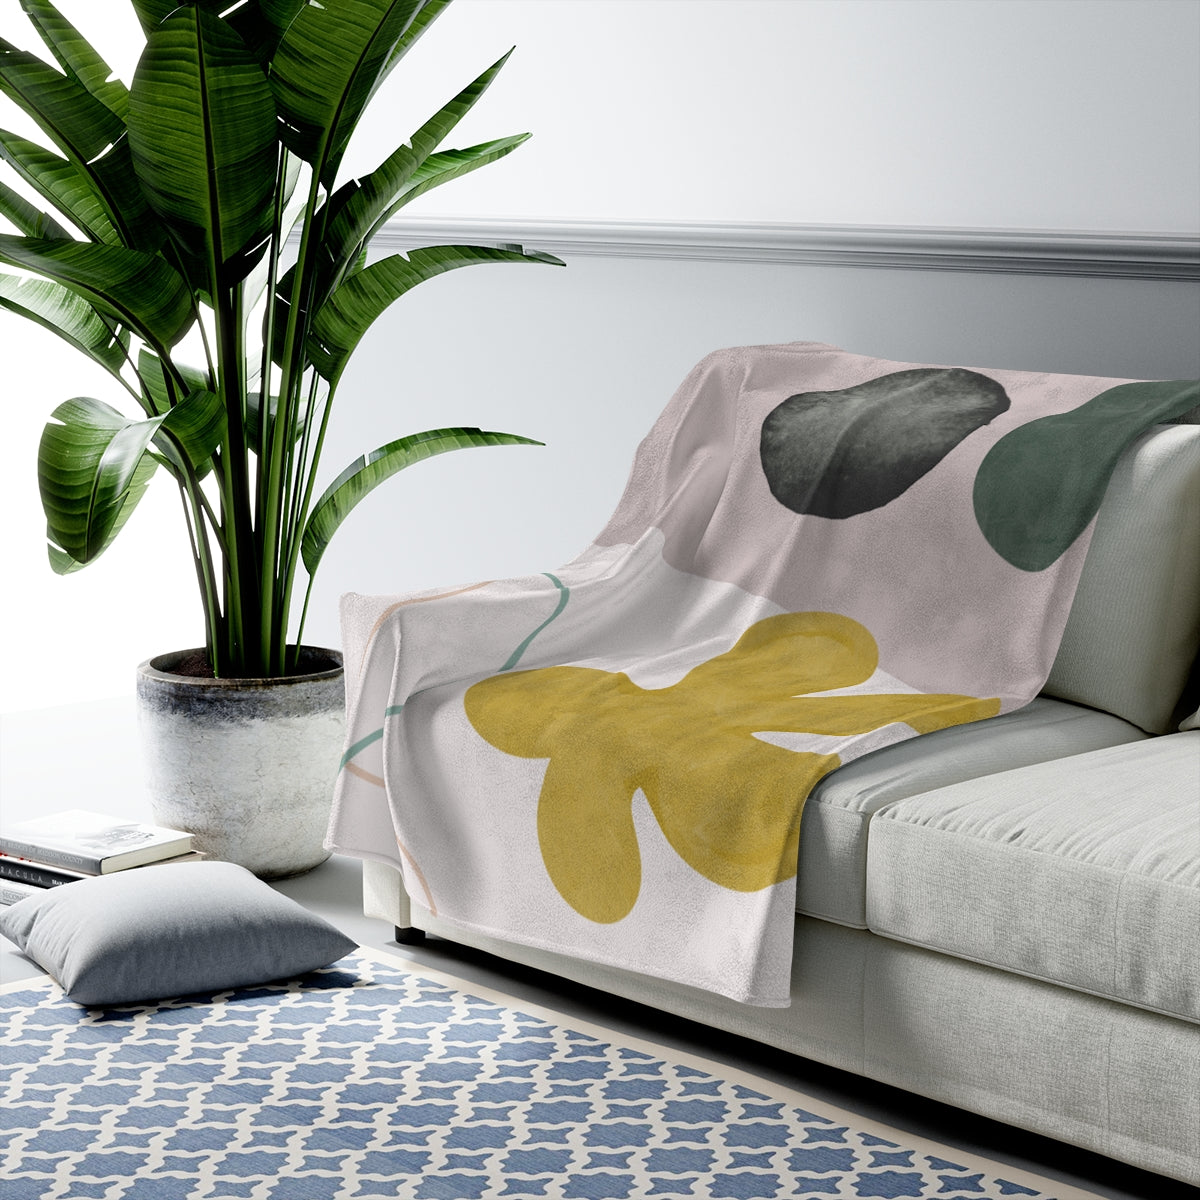 Abstract Shapes Blanket Plush Throw